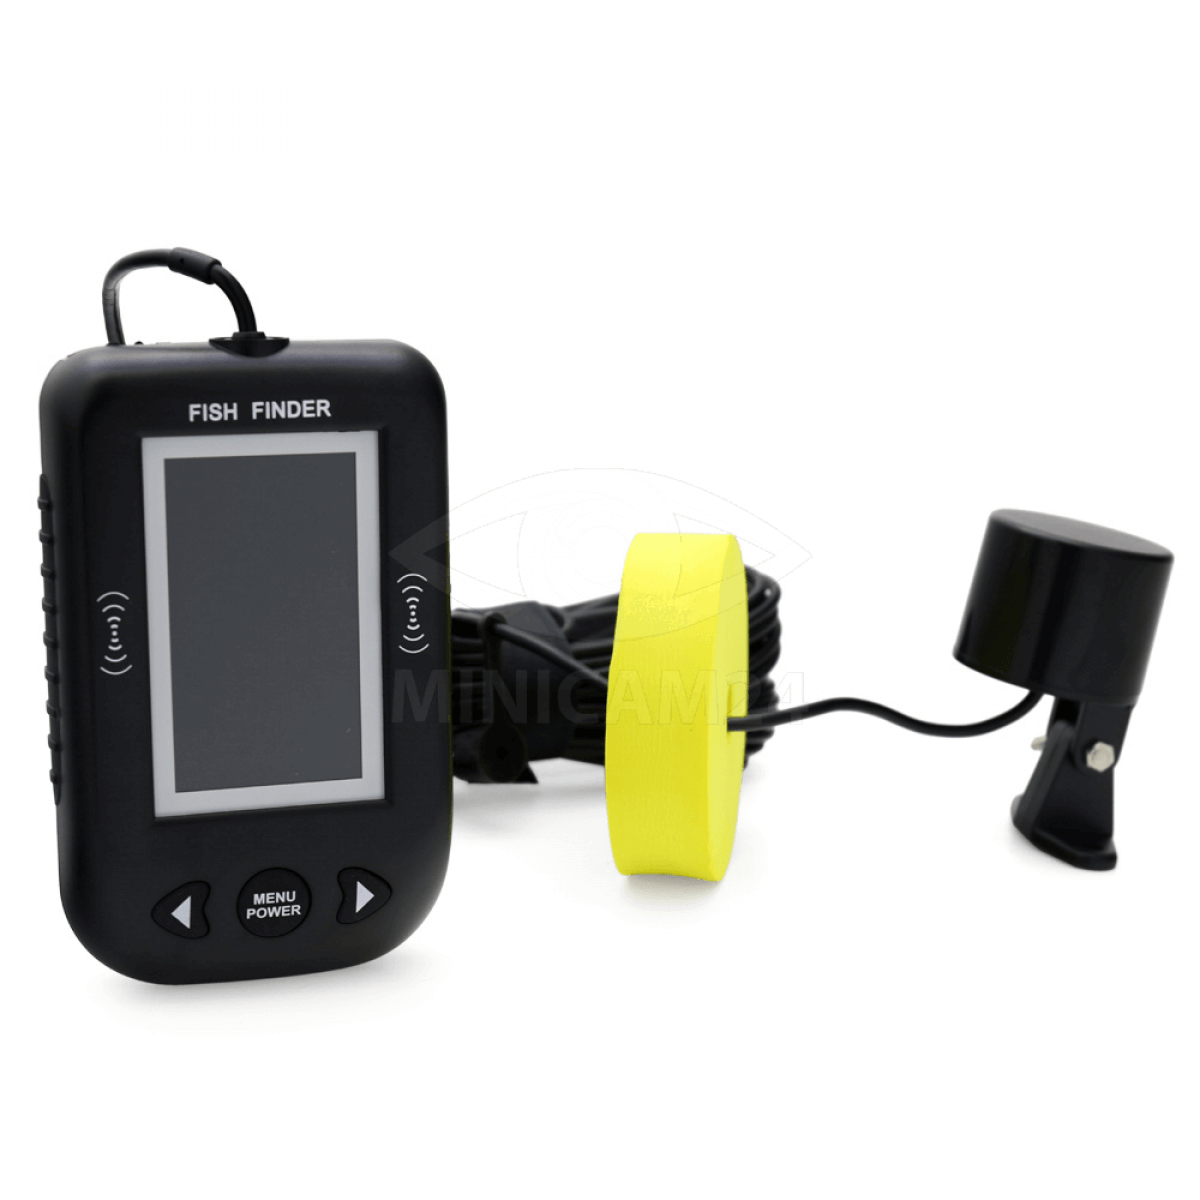 sonar fish finder df48 manually meaning